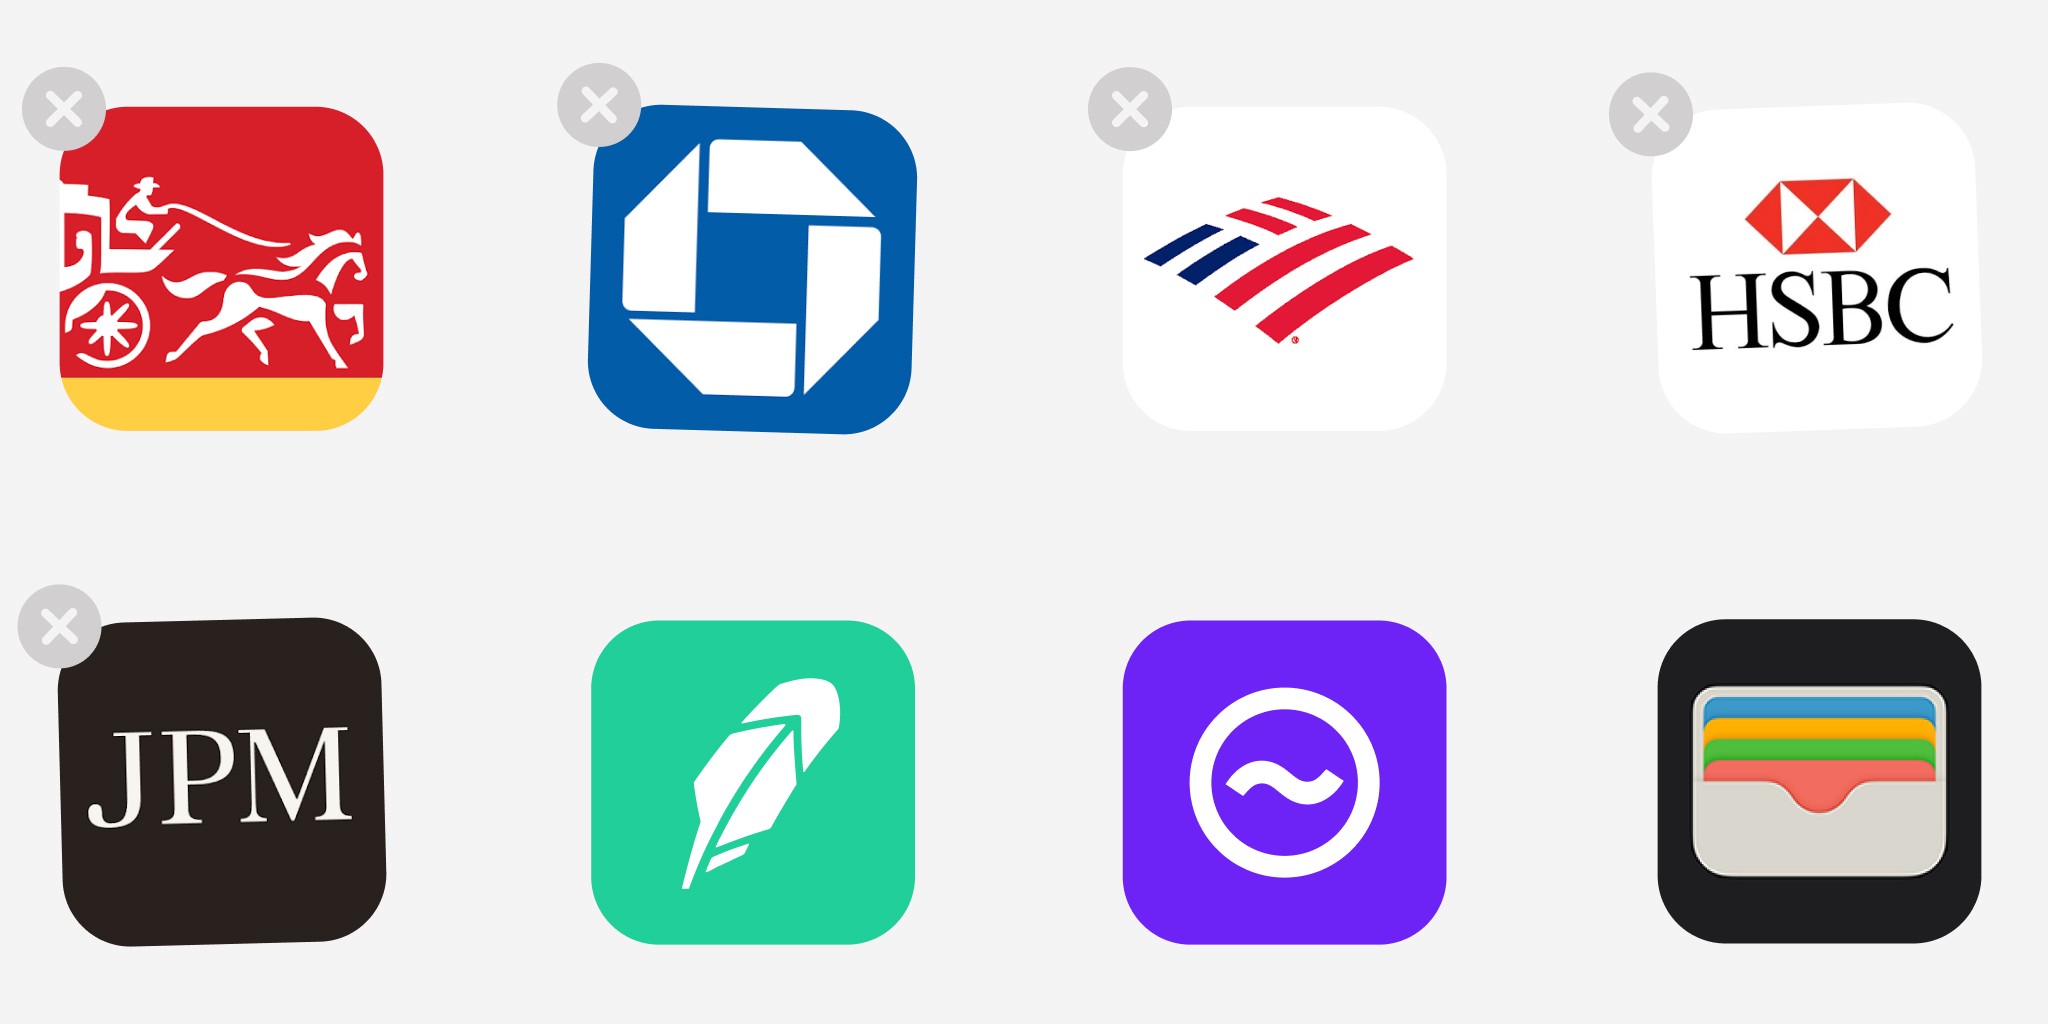 Small and large bank app icons installed on a phone